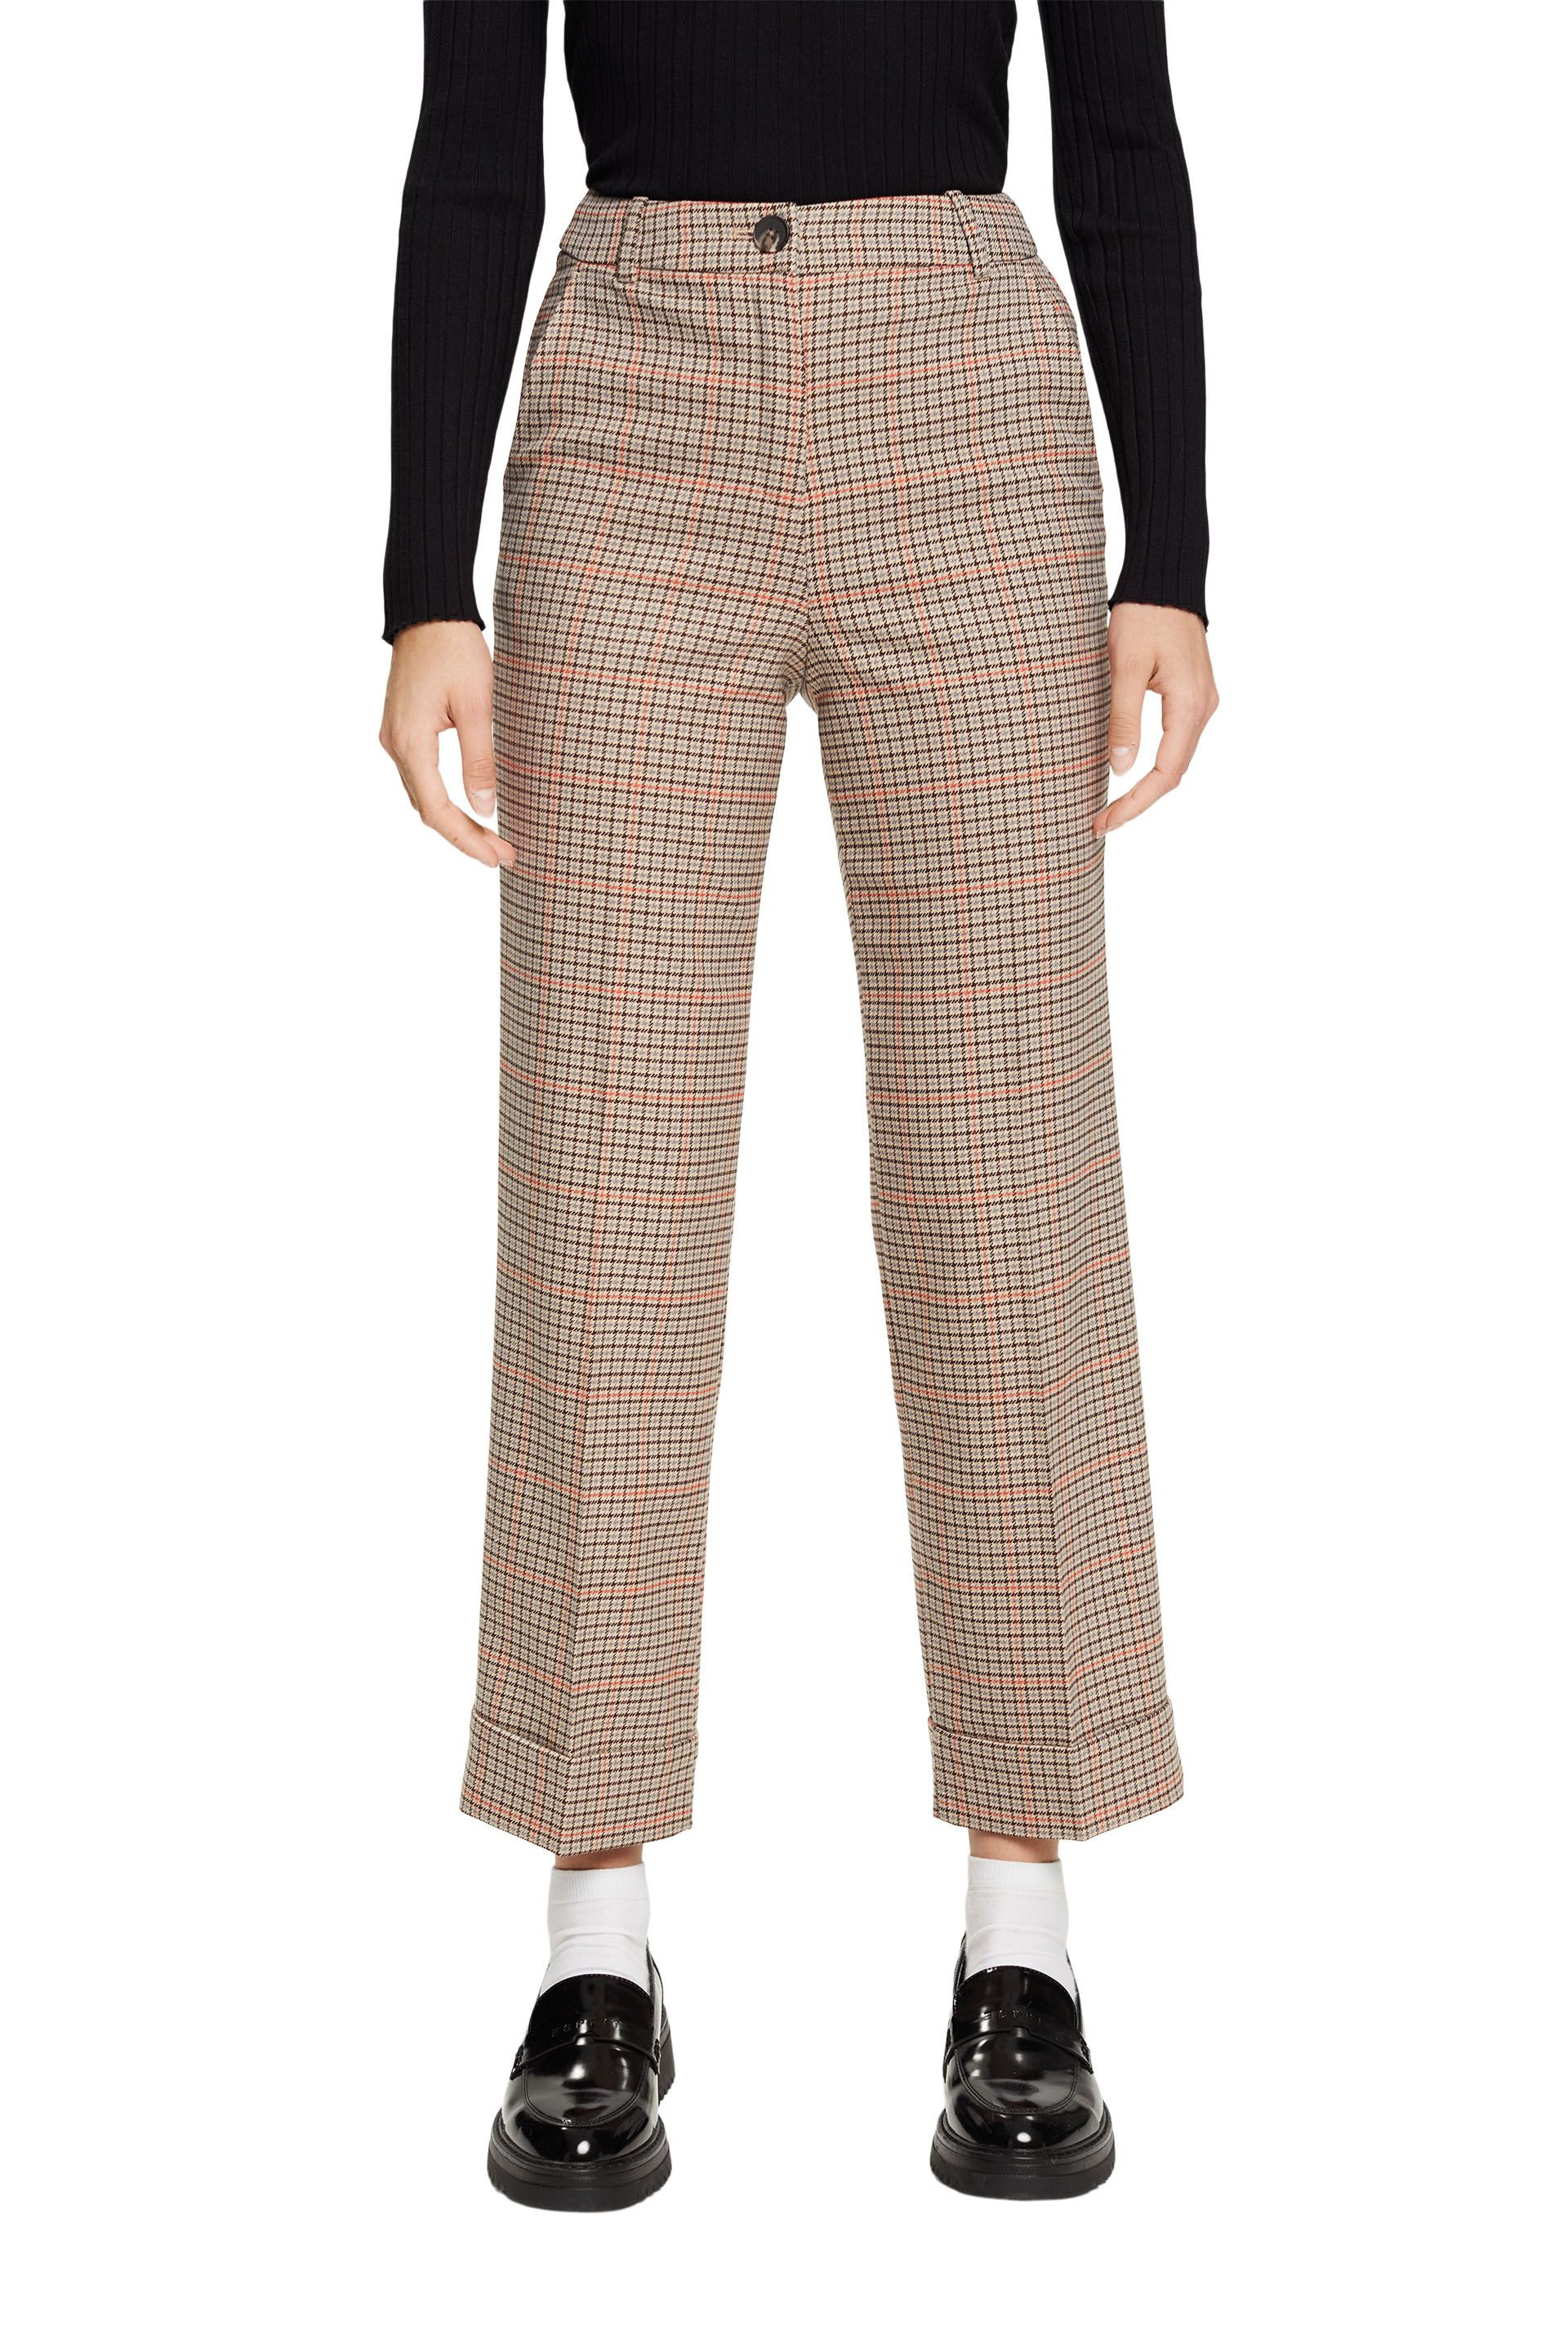 Trousers with a checked pattern, Beige, large image number 2